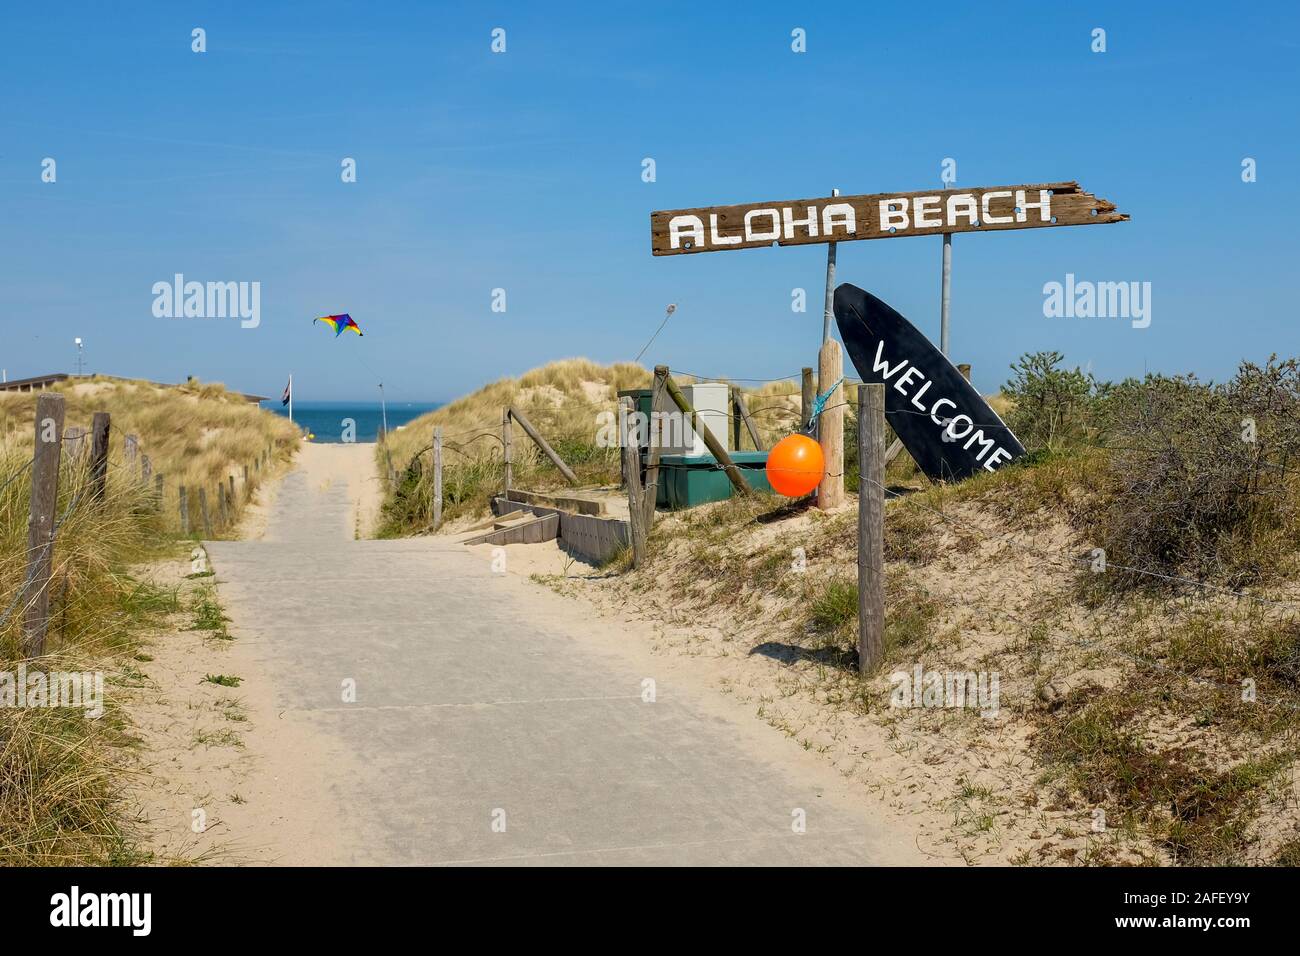 Domburg, Netherlands - 7 May 2016: Entry to the Aloha Beach Club, located on one of the many beaches in Zeeland Stock Photo